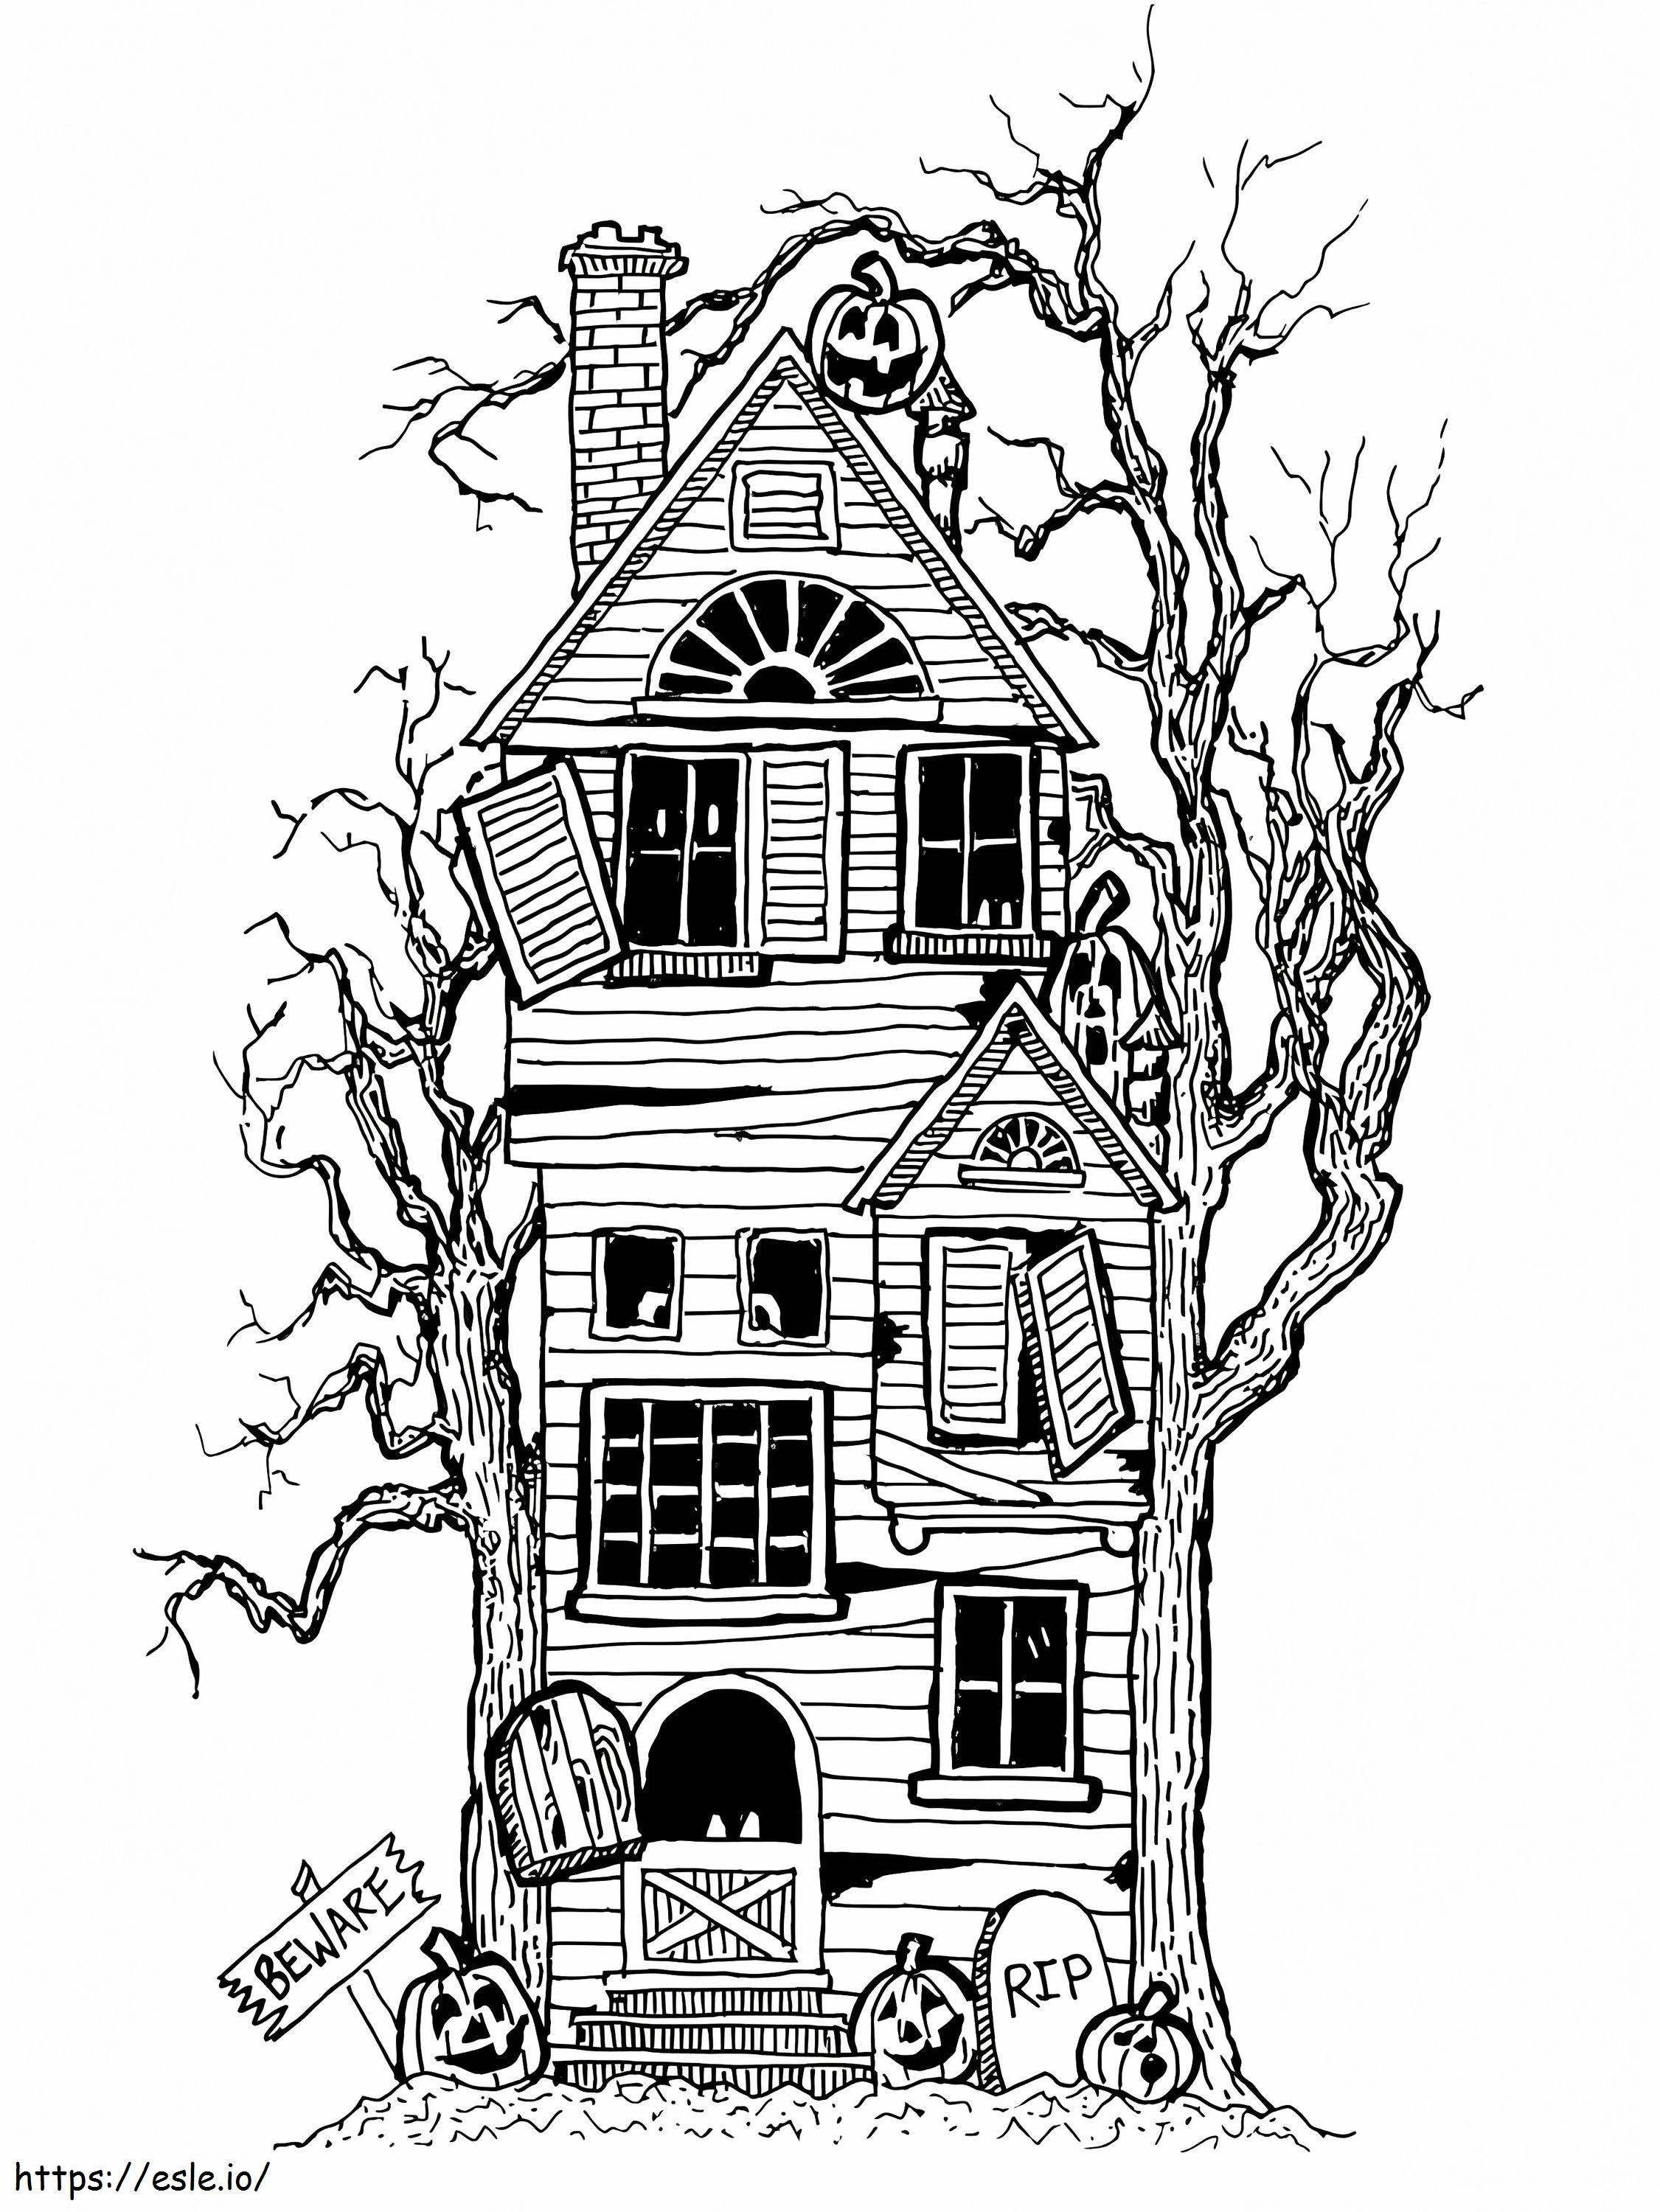 Maison Hantee Dhalloween 2 coloring page